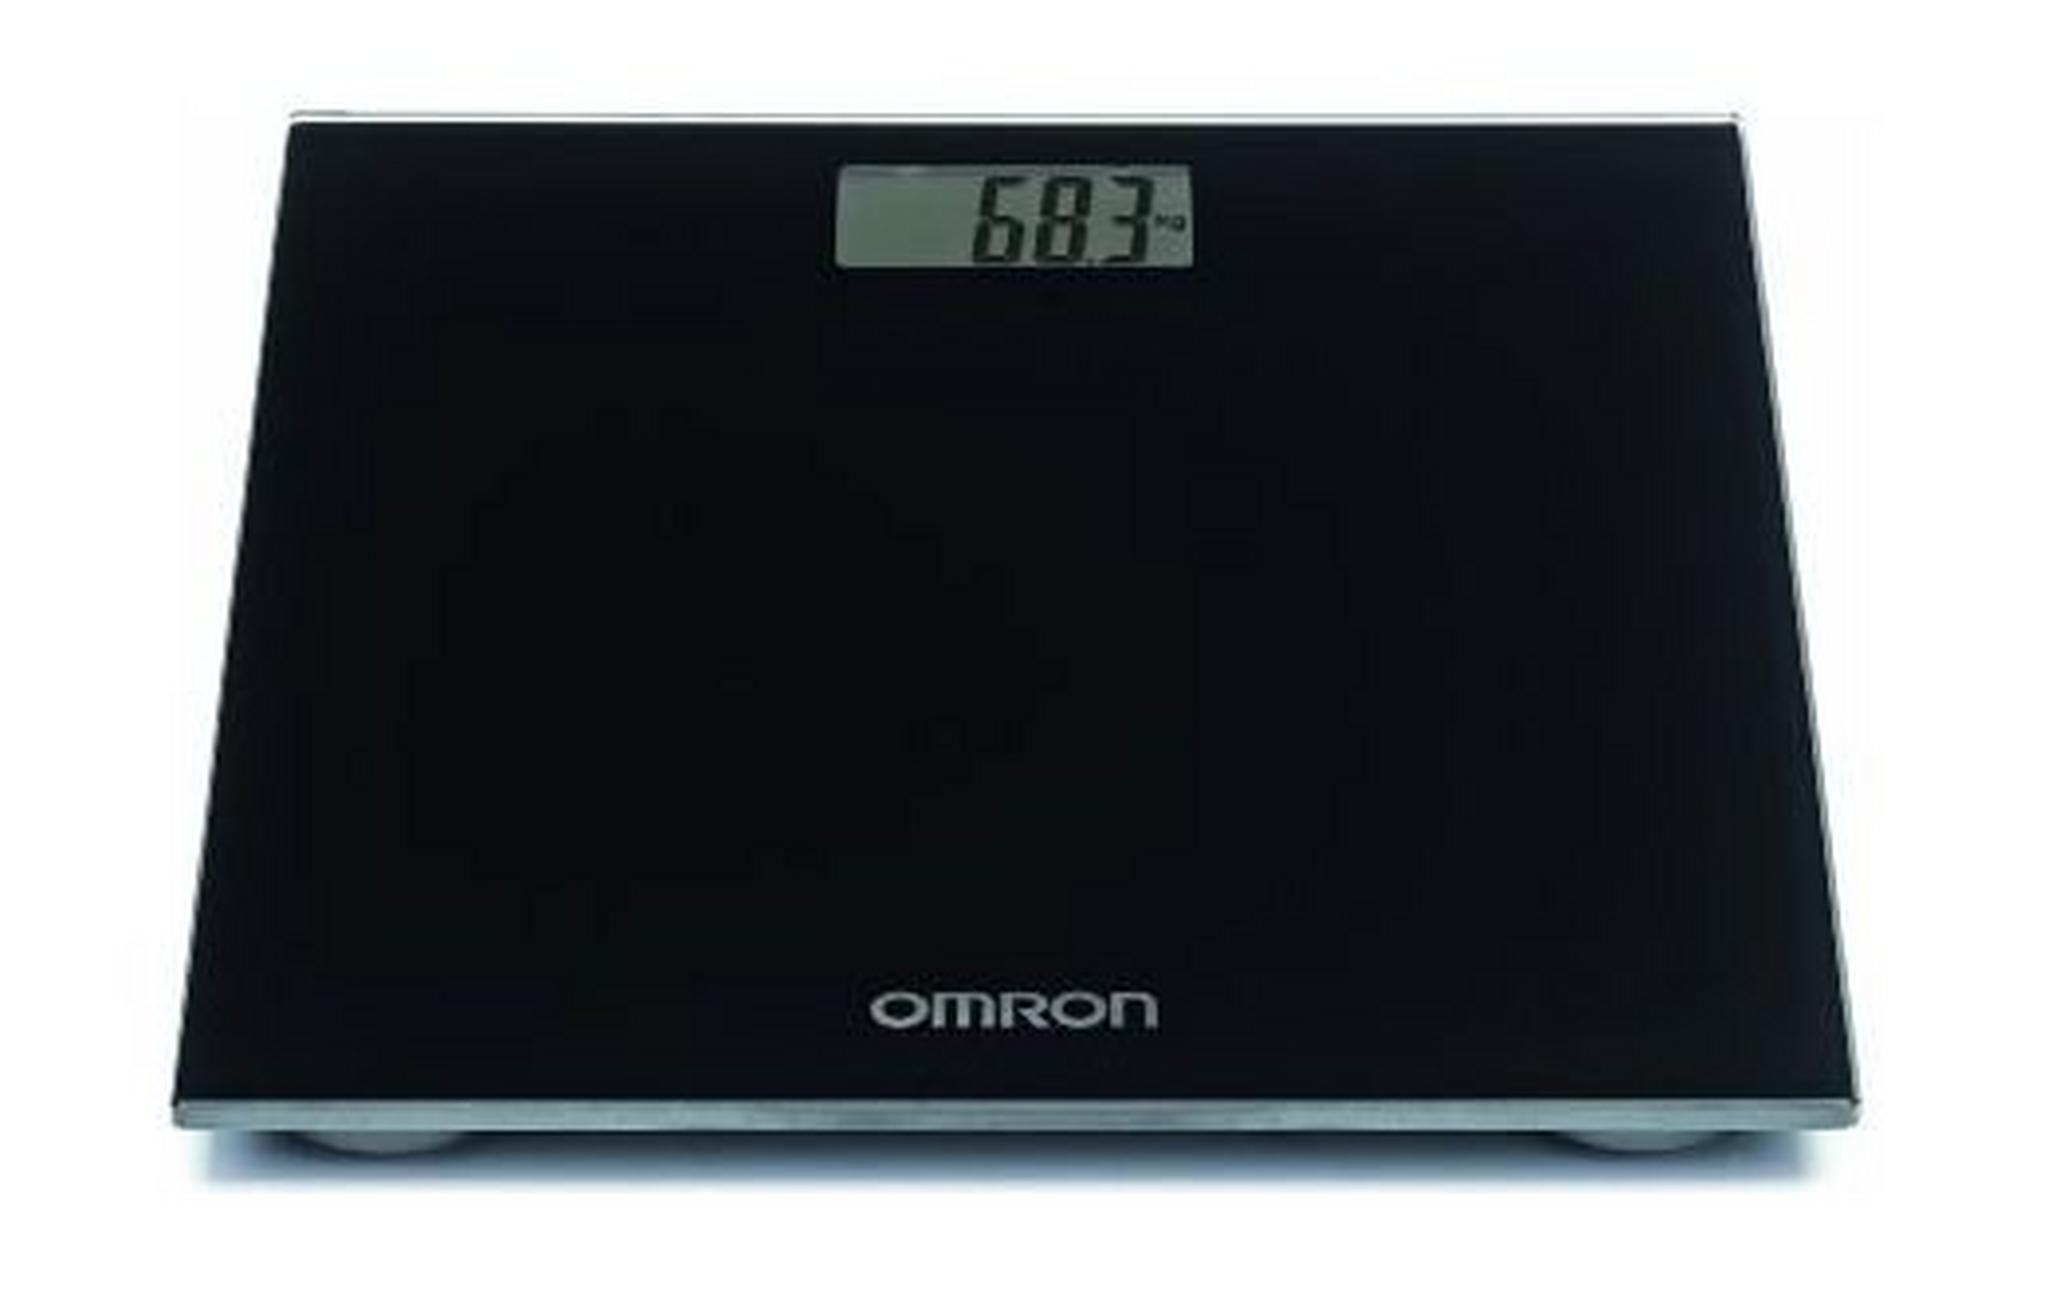 Omron HN-289 Personal Scale - Midnight Black